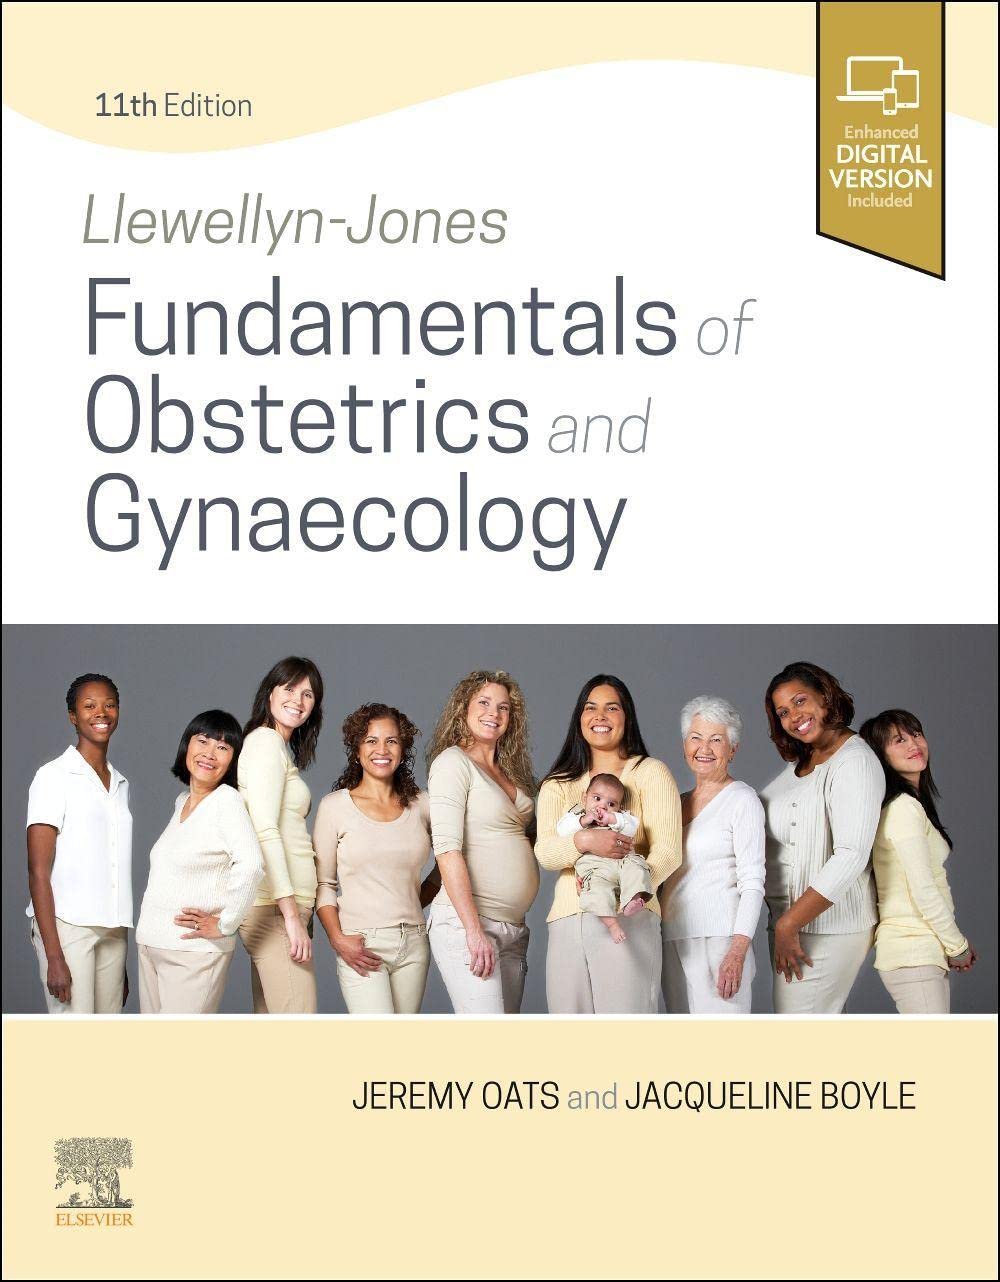 Llewellyn-Jones Fundamentals of Obstetrics and Gynaecology 11th Edition